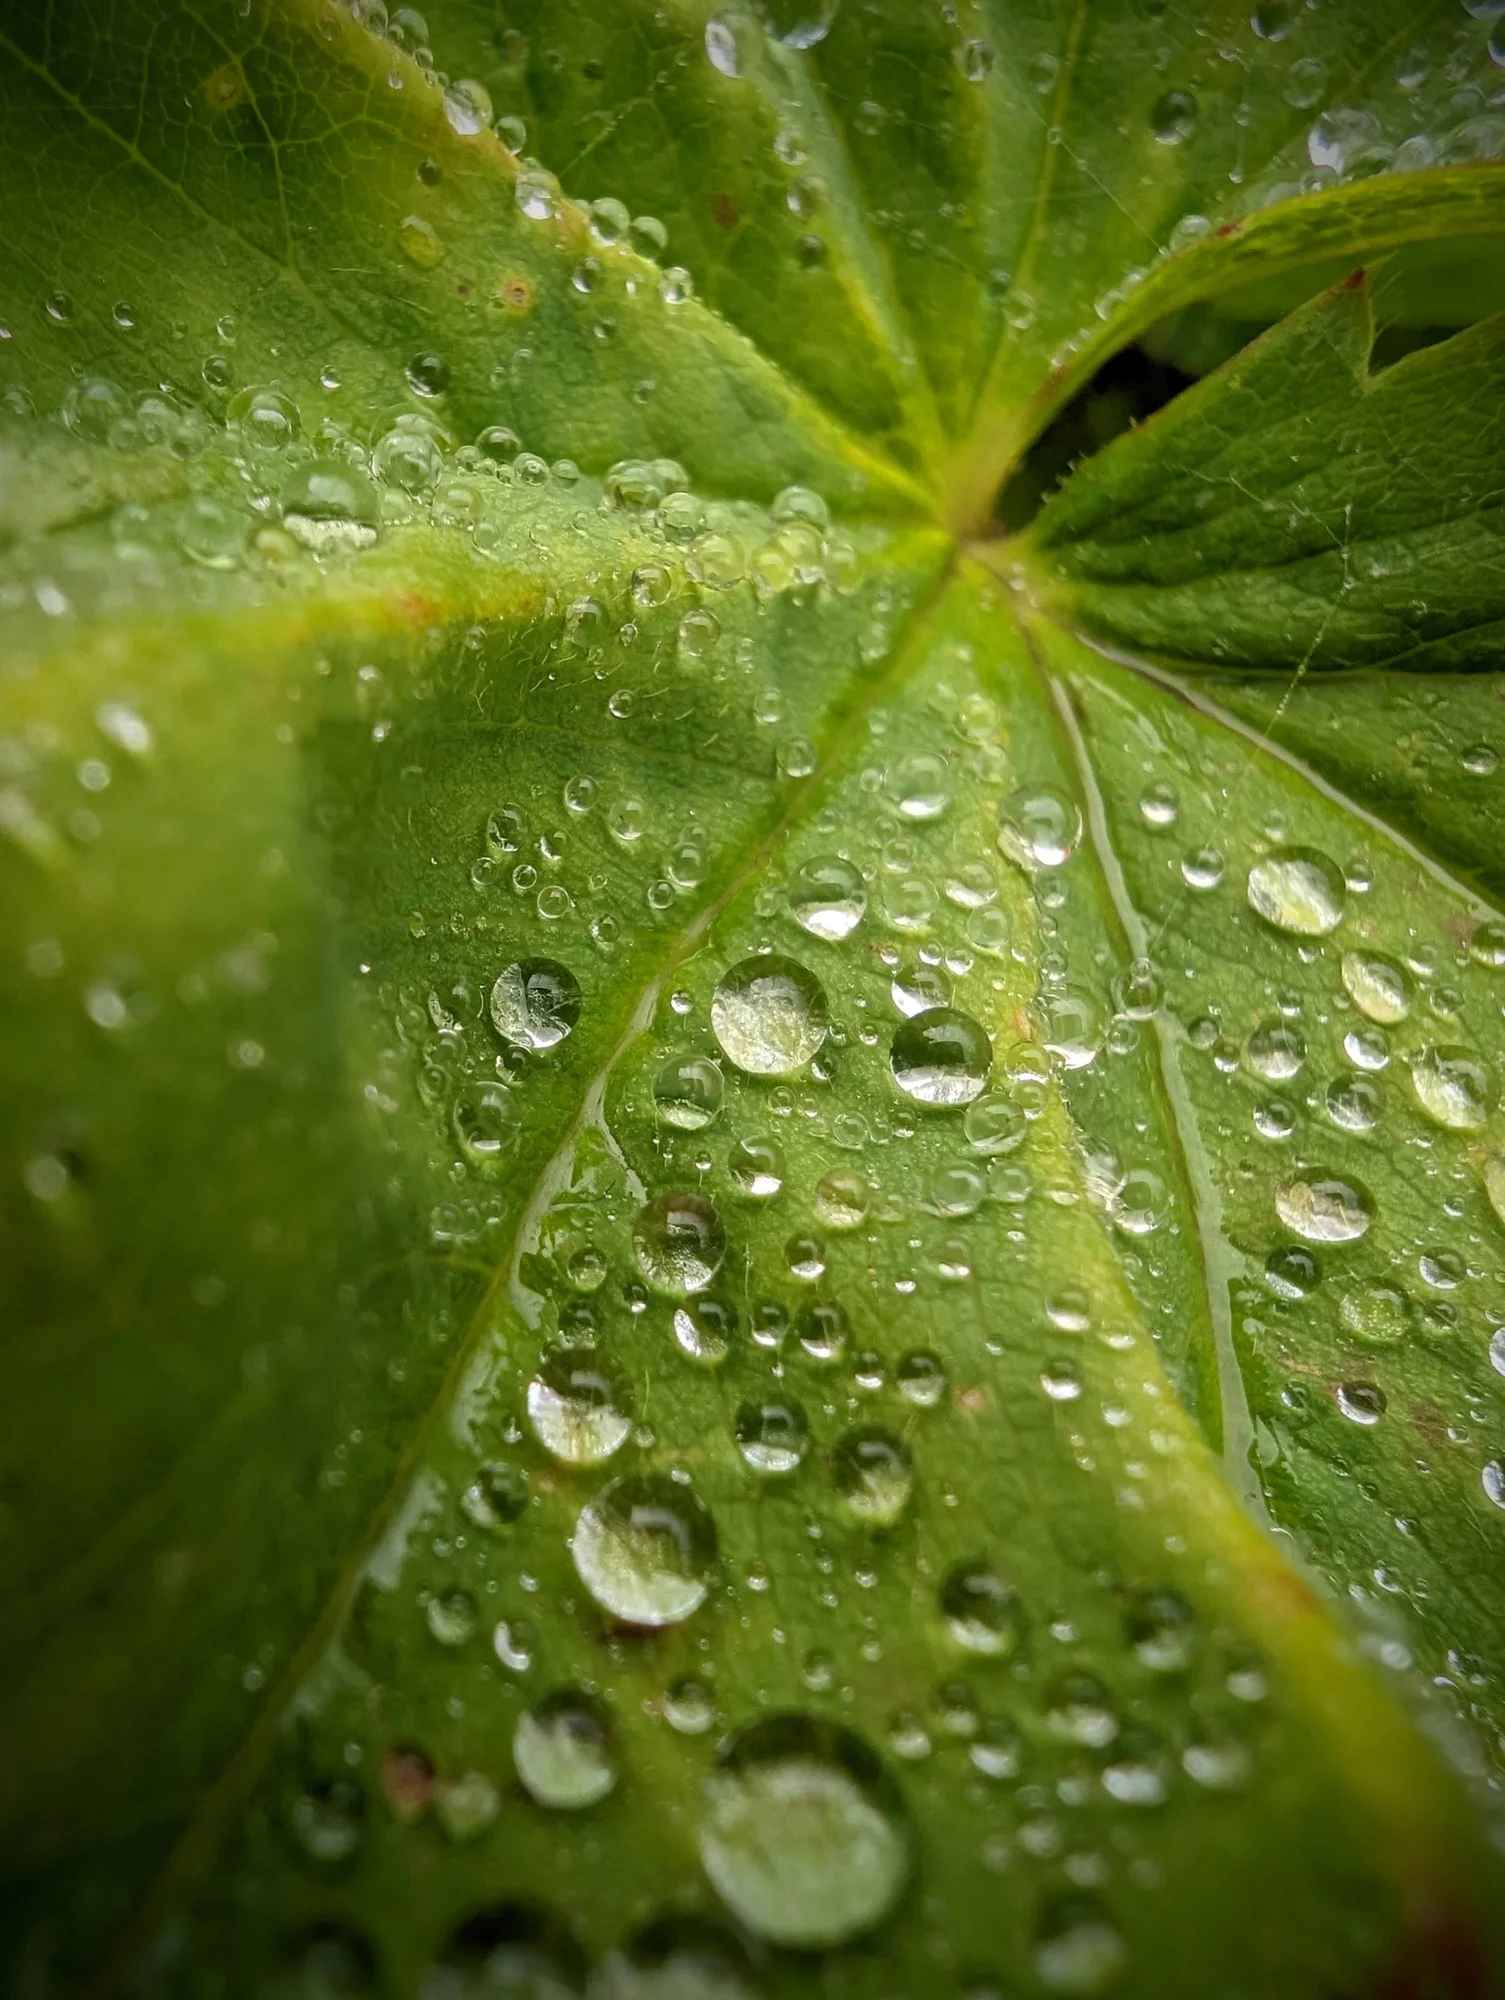 A photo of drops of water on a leaf